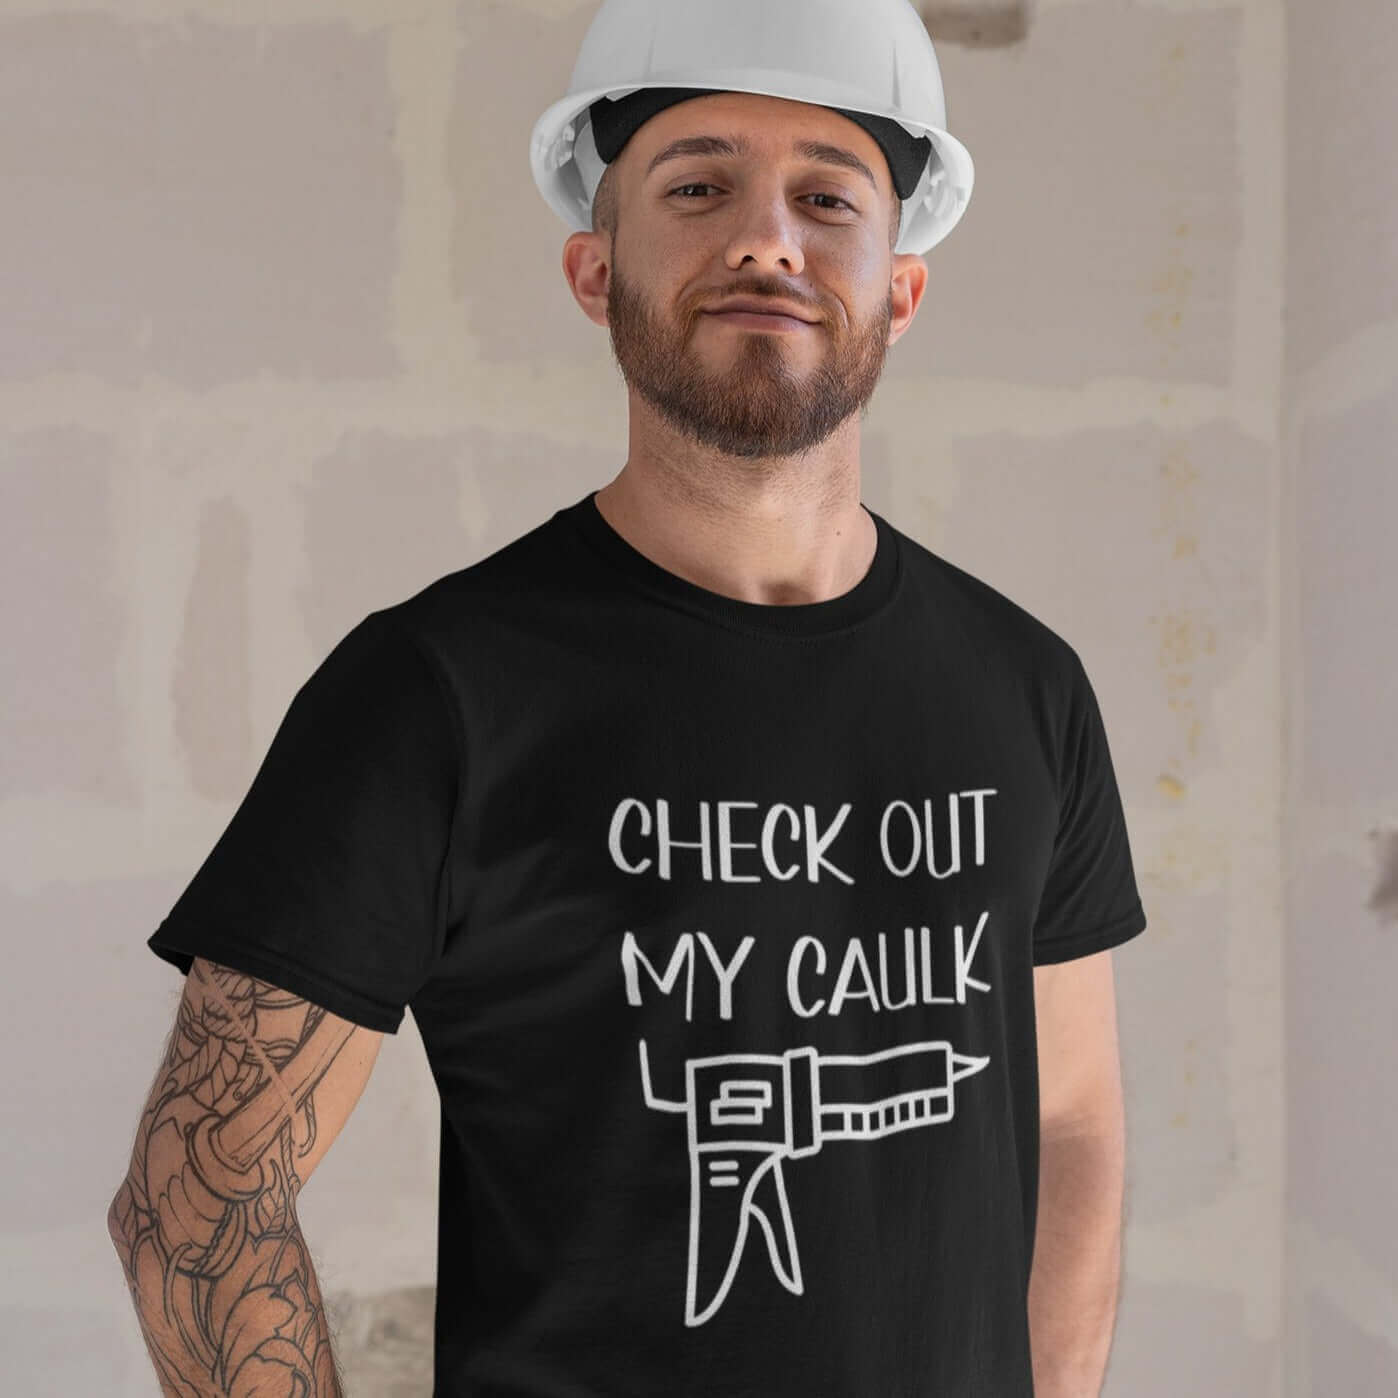 Man wearing a hardhat and a black t-shirt with the pun phrase Check out my caulk with a line drawing image of a caulking gun printed on the front.